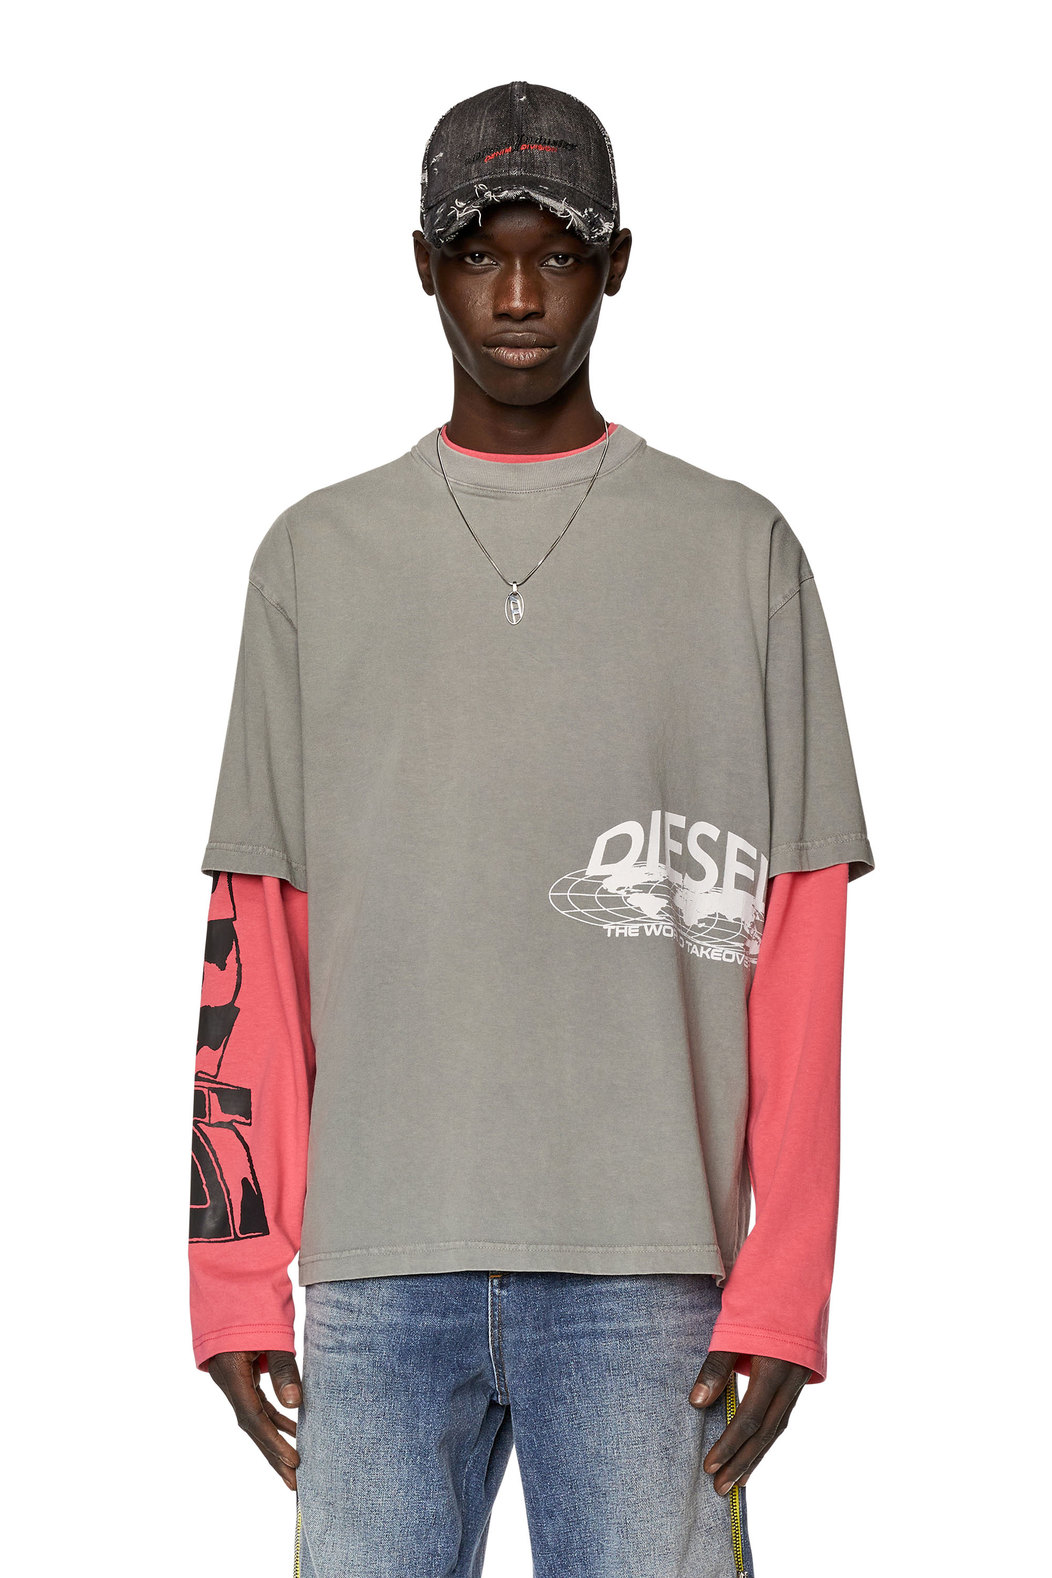 T-shirt with Diesel world prints